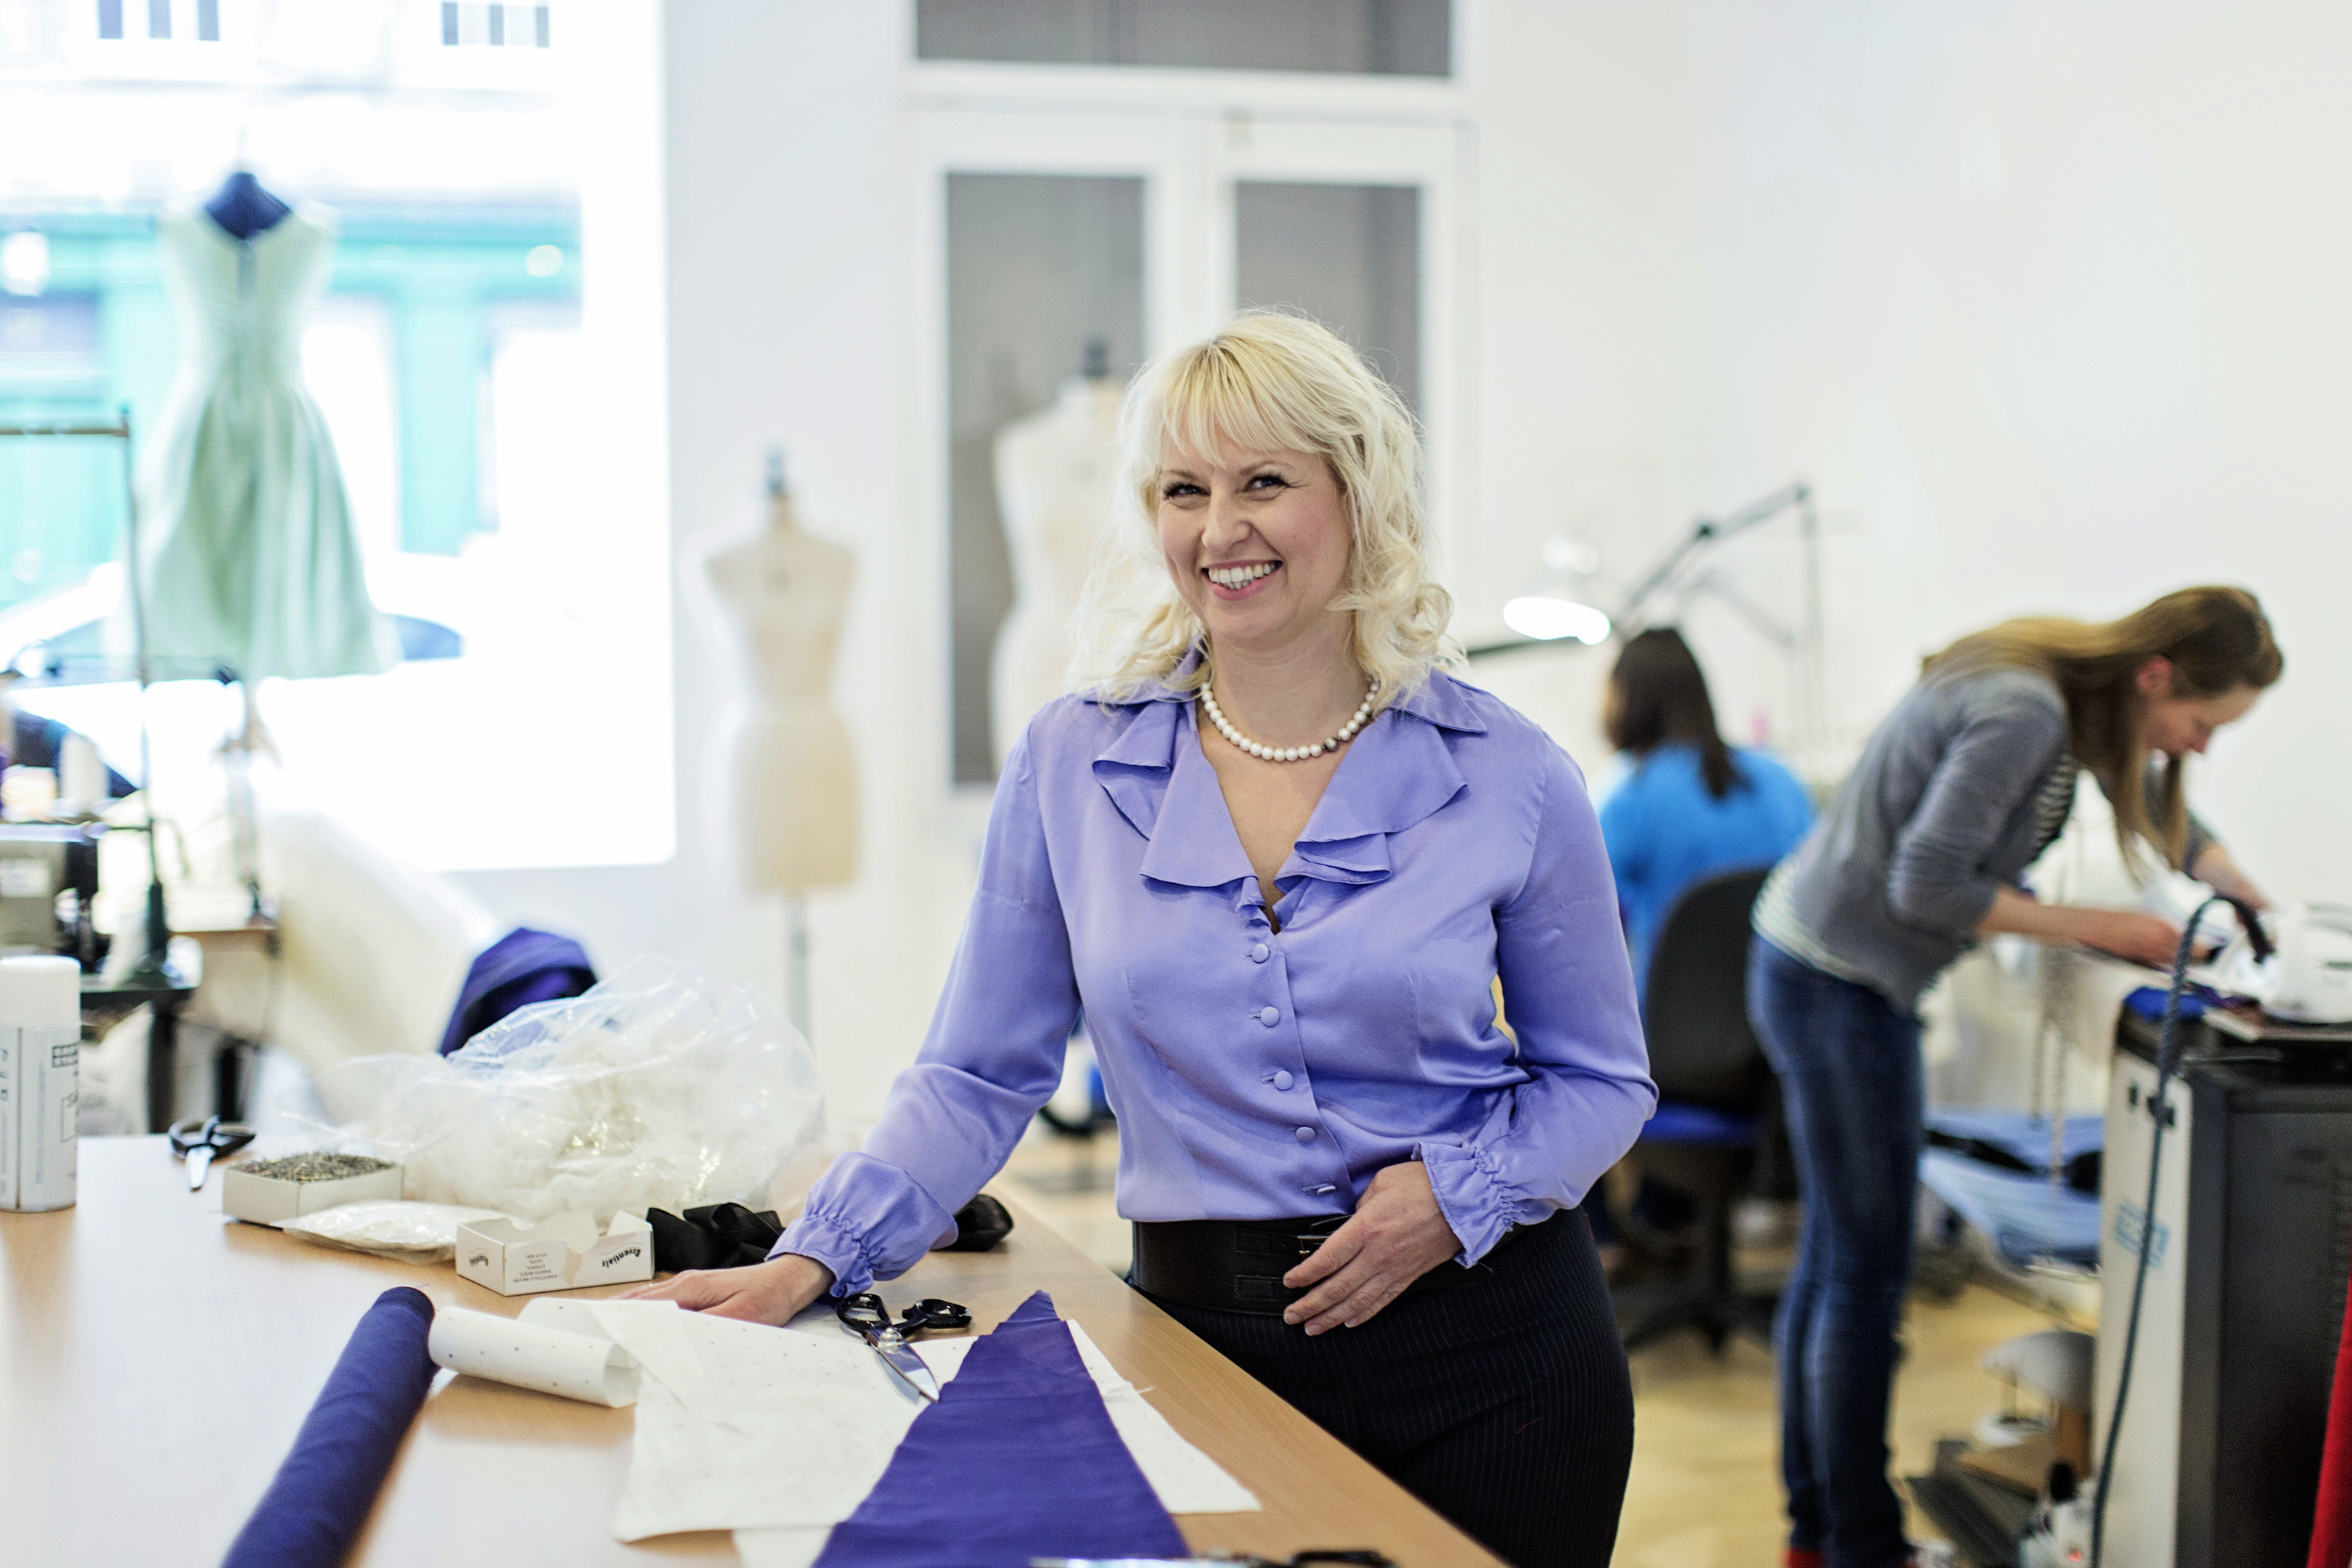 Mette Baillie, who suffered from breast cancer, but changed her medical regime so that she could continue to make wedding dresses. (Paul Raeburn)